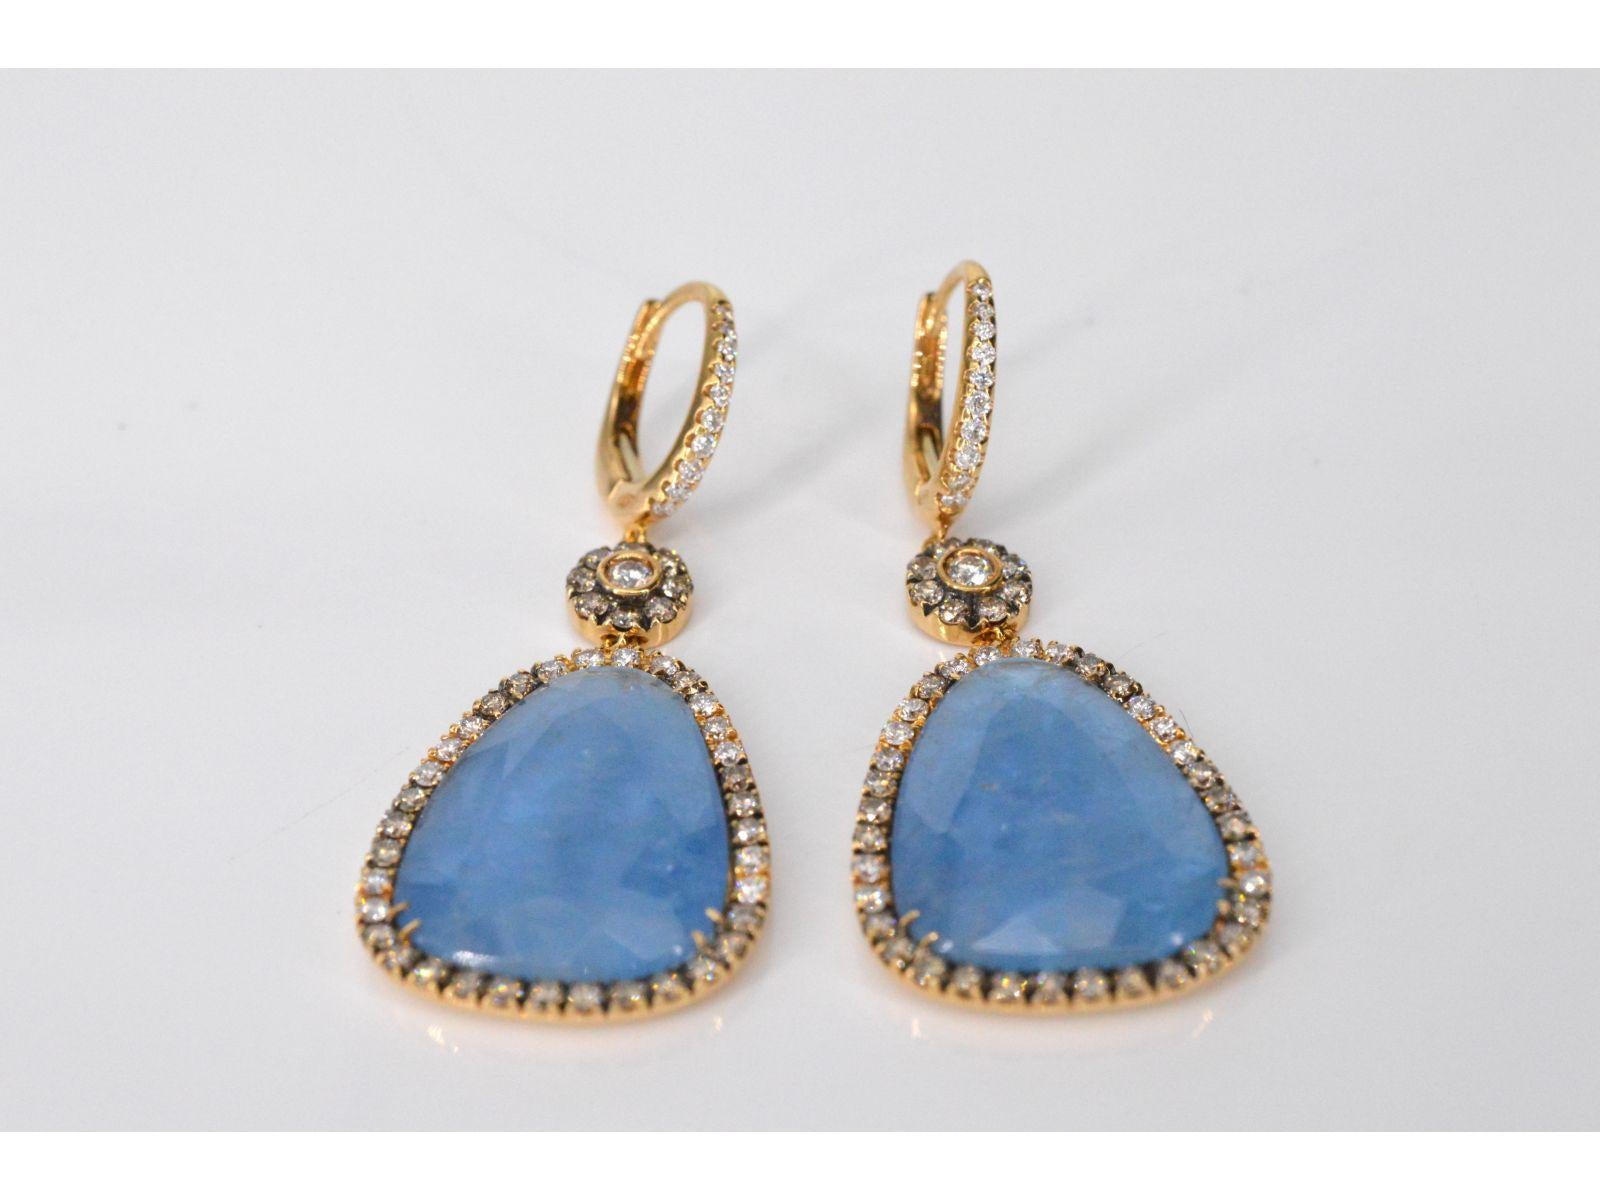 Contemporary Crivelli - Golden earrings with large natural gemstones and a surround of diamon For Sale